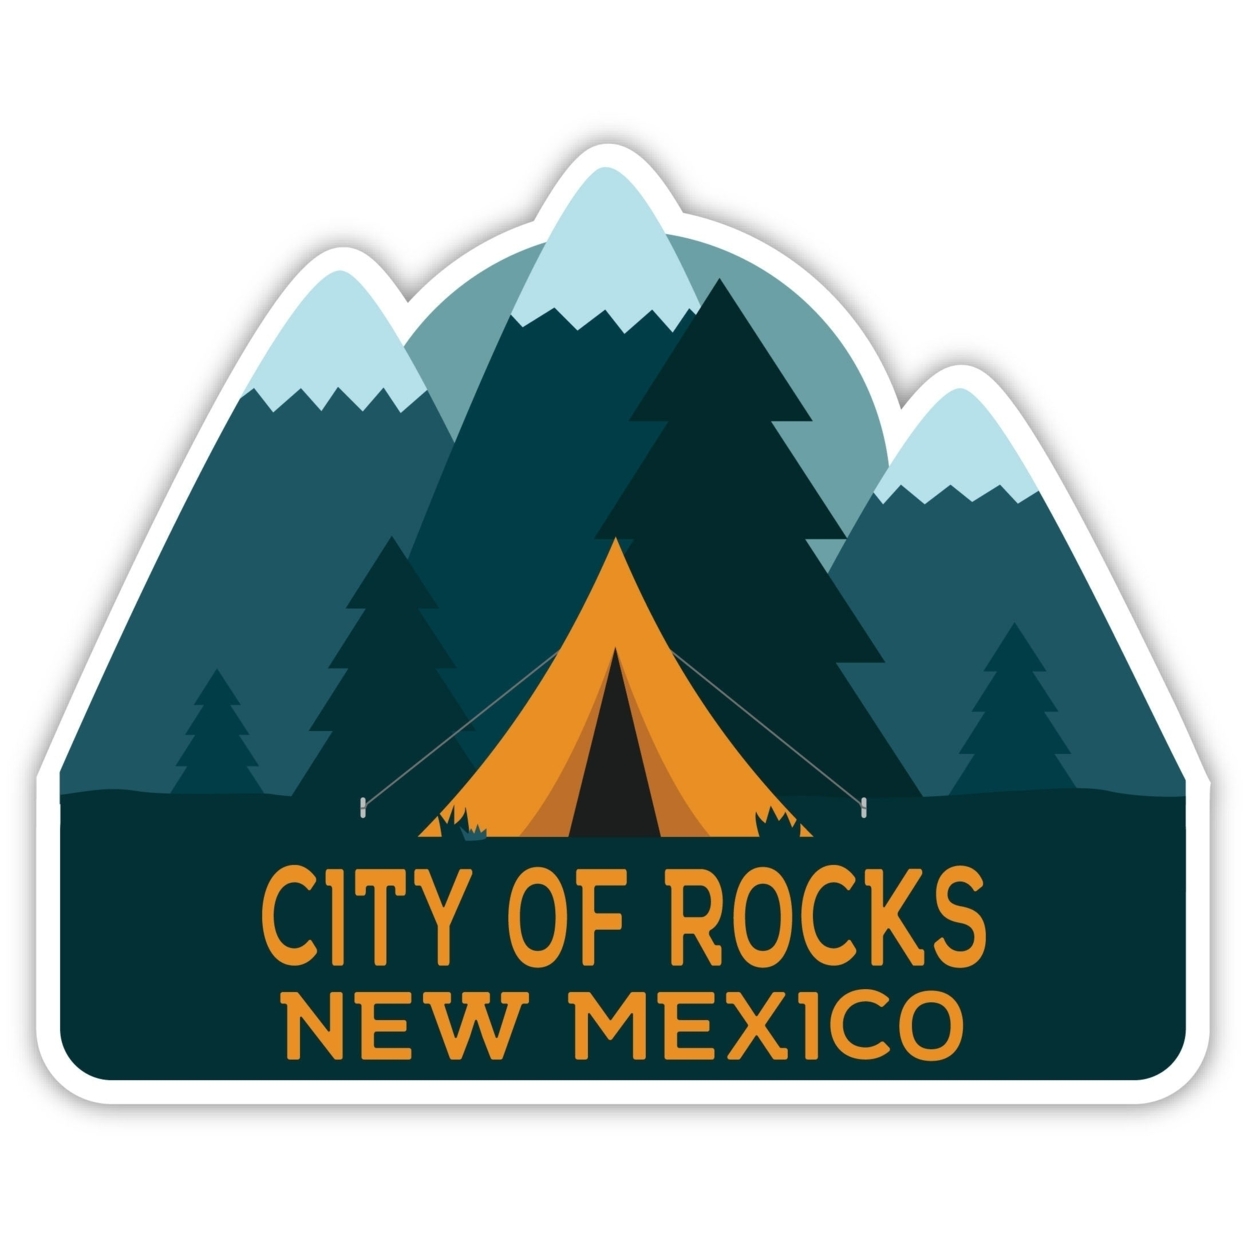 City Of Rocks New Mexico Souvenir Decorative Stickers (Choose Theme And Size) - 4-Pack, 12-Inch, Tent